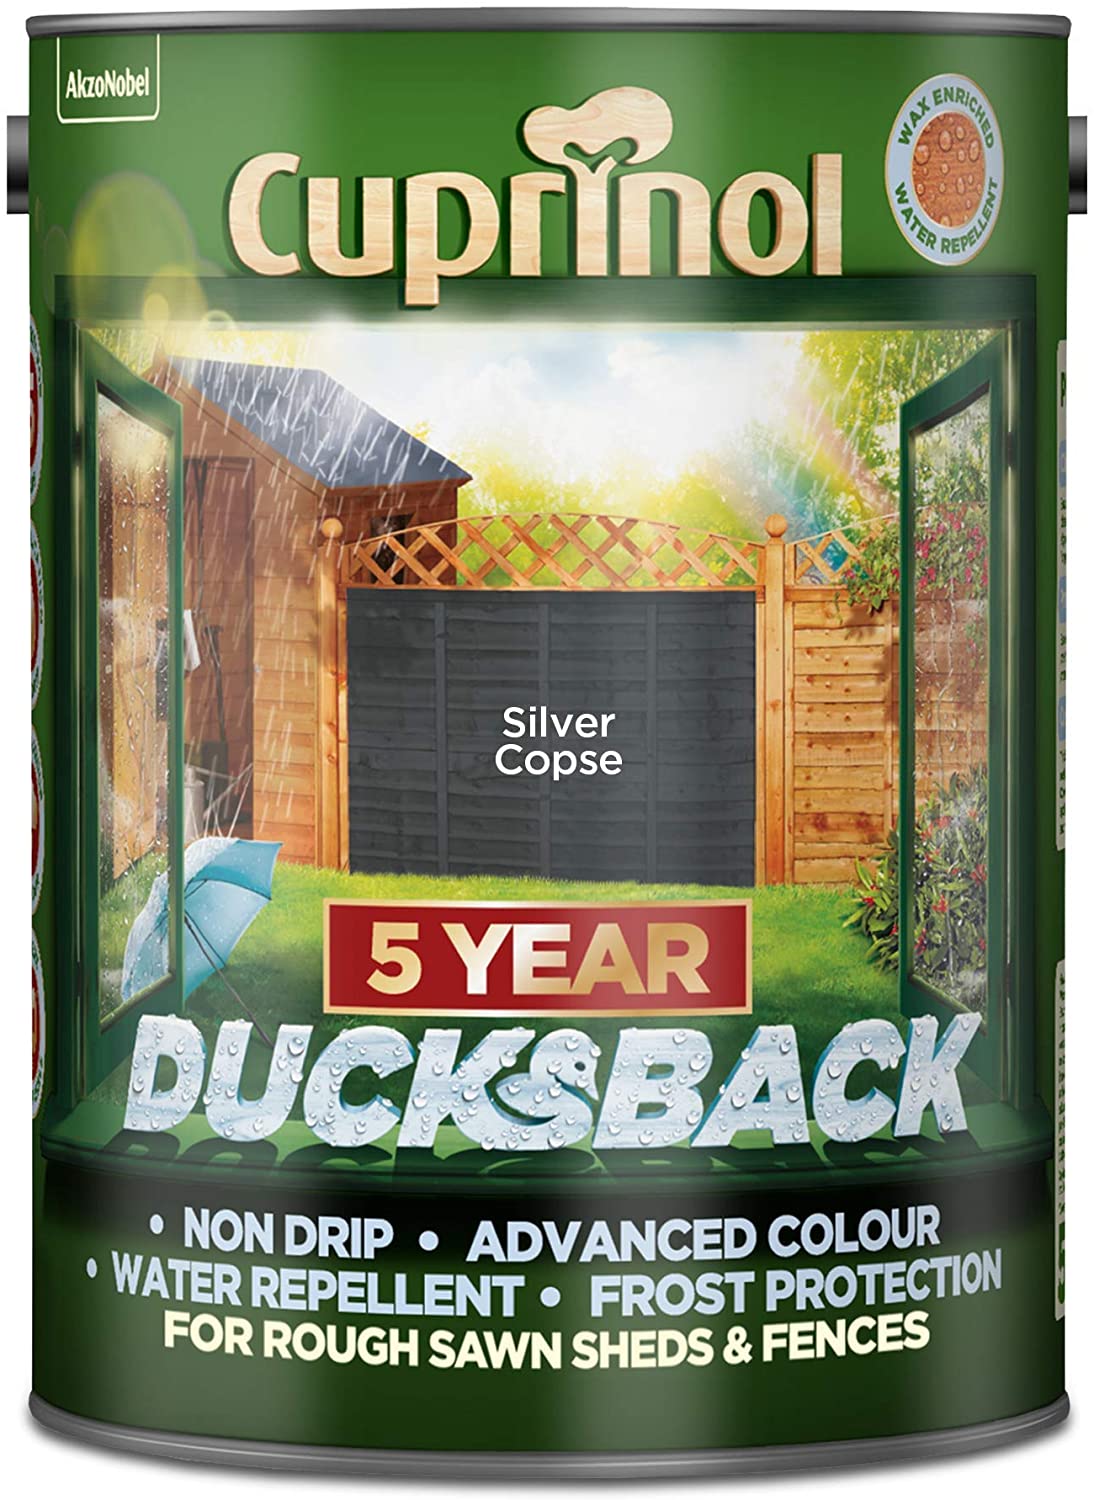 Cuprinol Ducksback 5 Year Waterproof For Sheds And Fences - Silver Copse Litre Garden & Diy Home